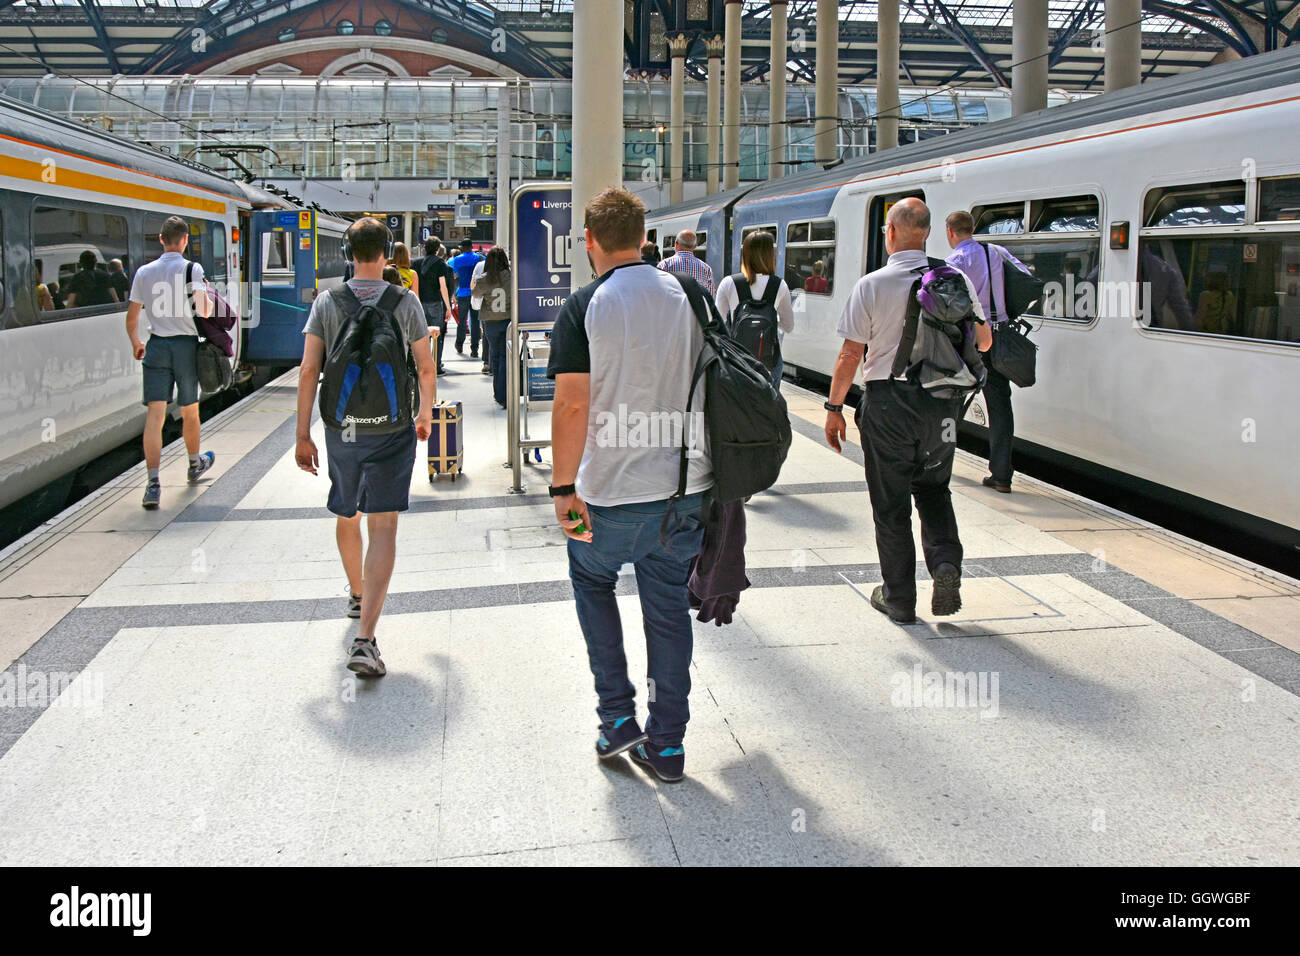 Male public transport train passengers back view Abellio Greater Anglia trains arriving at City of London Liverpool Street UK train station platform Stock Photo